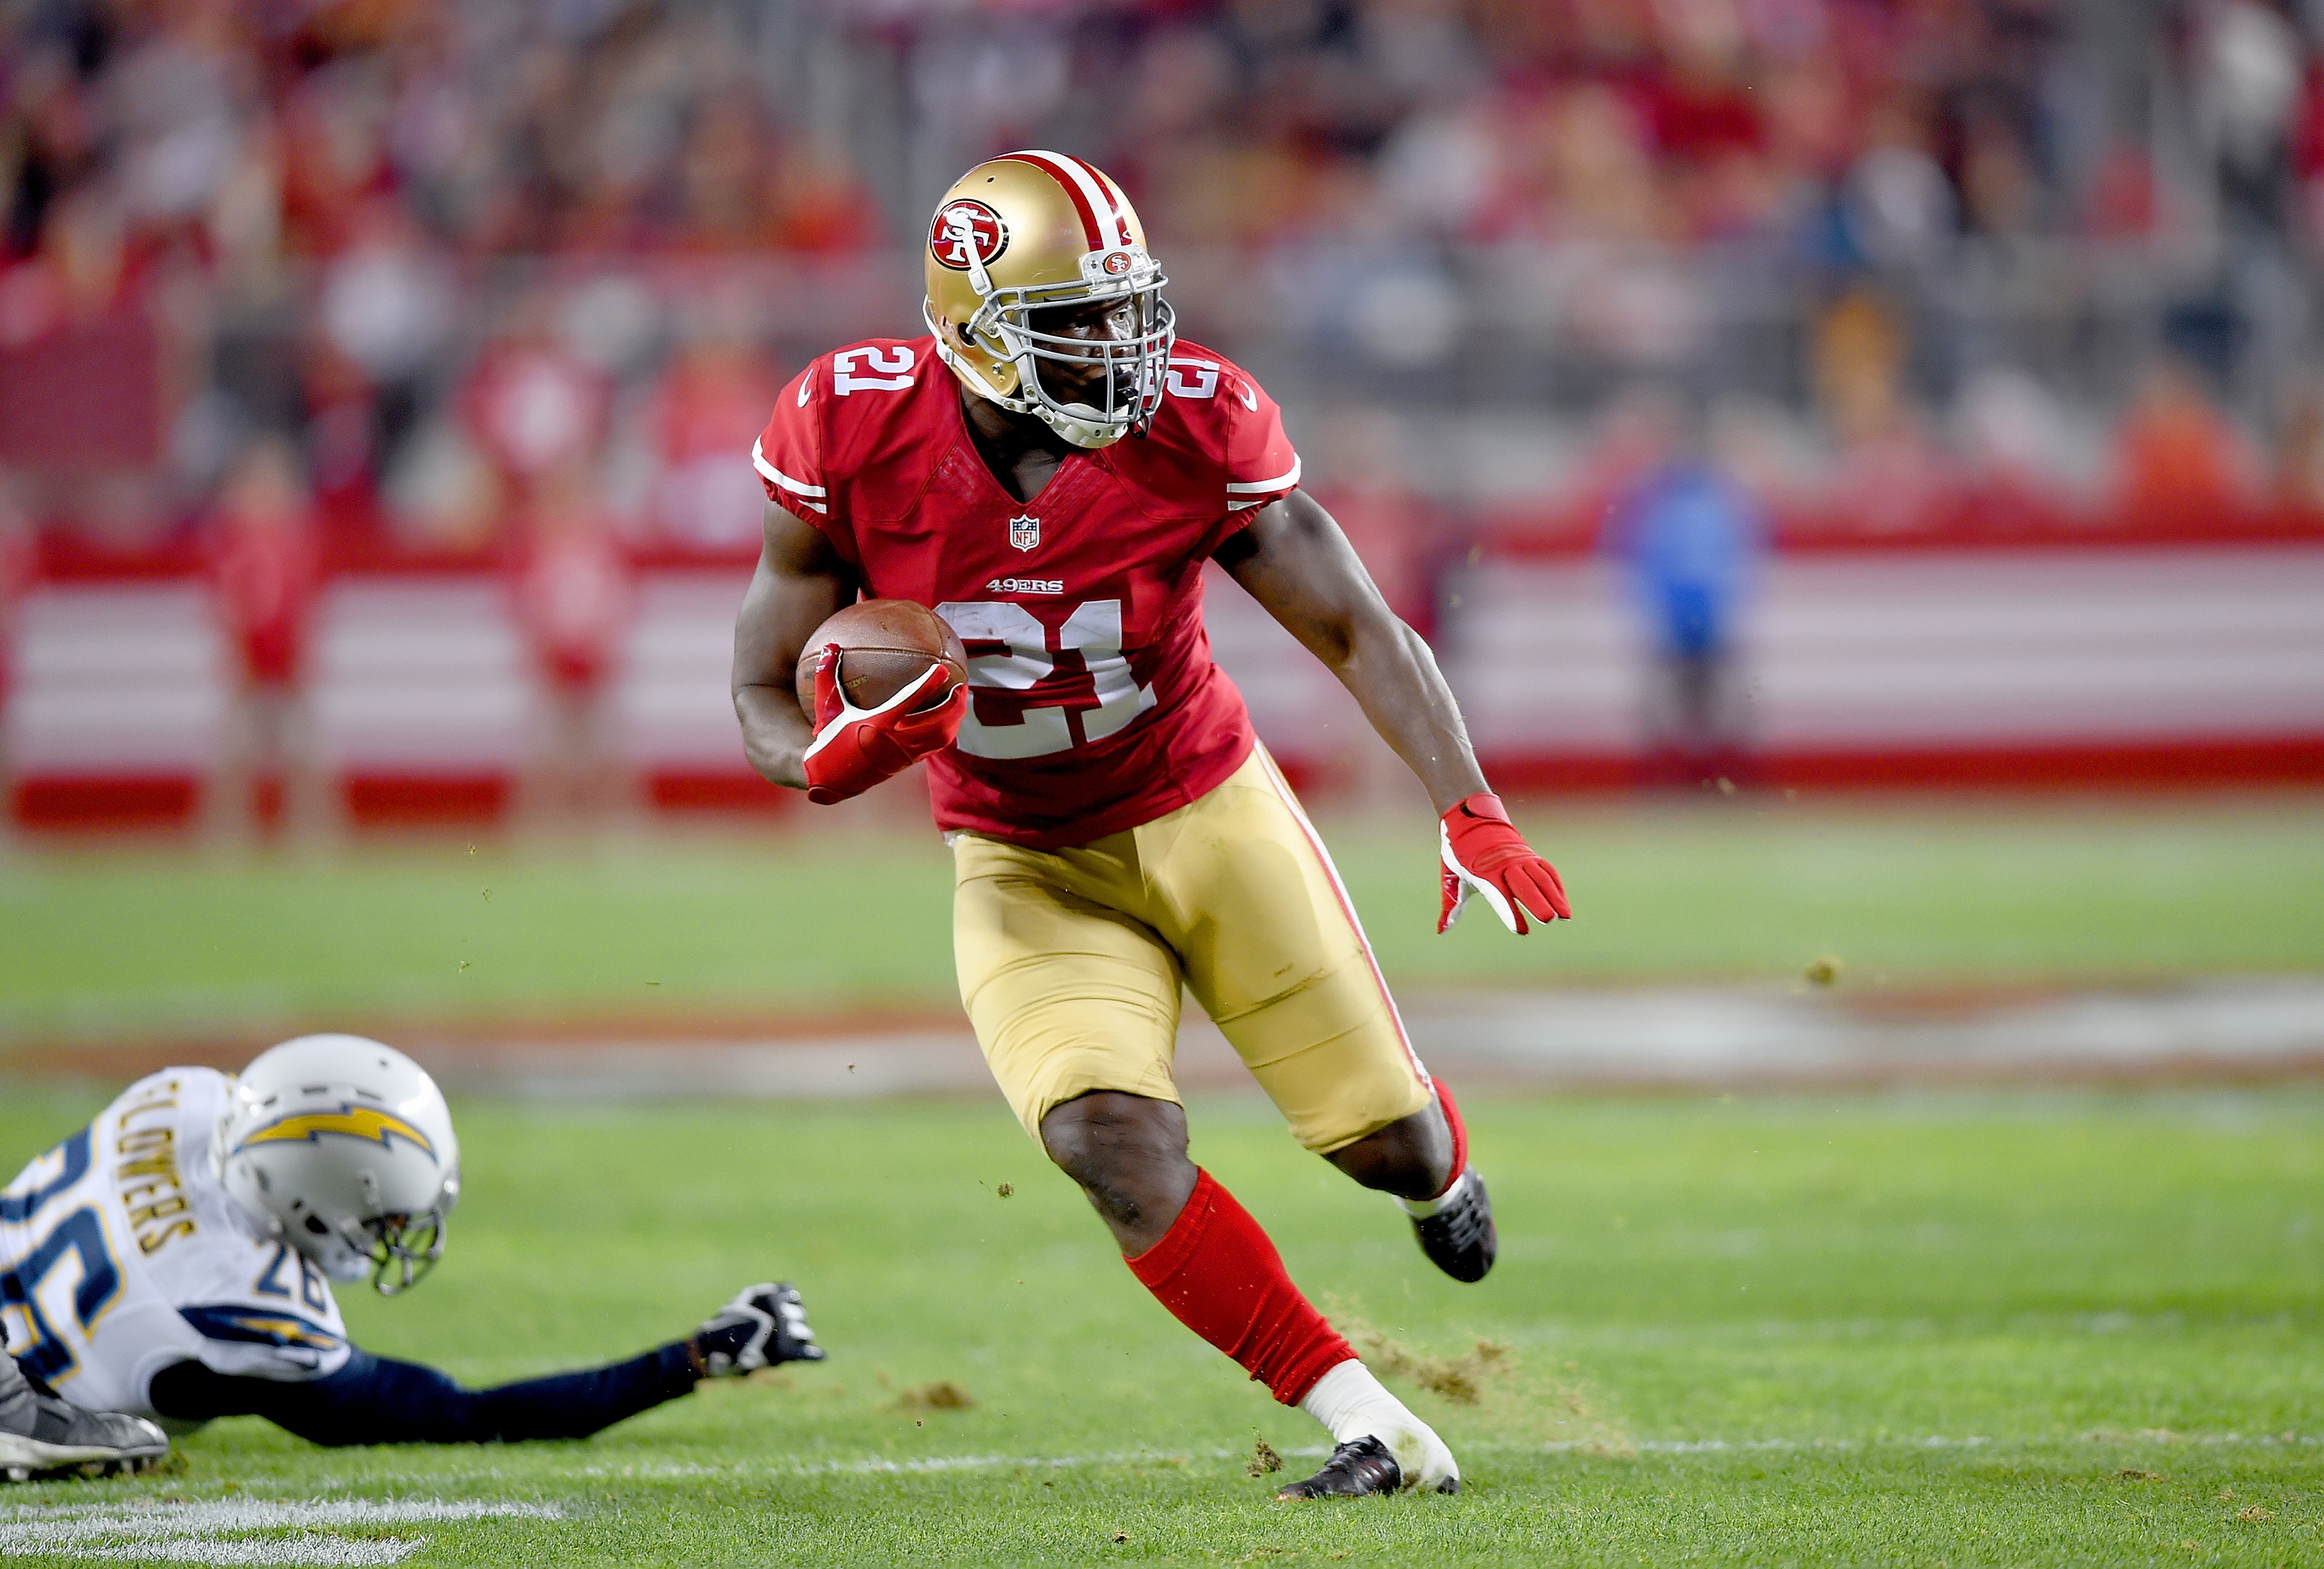 Gore retires from NFL after signing one-day contract with 49ers